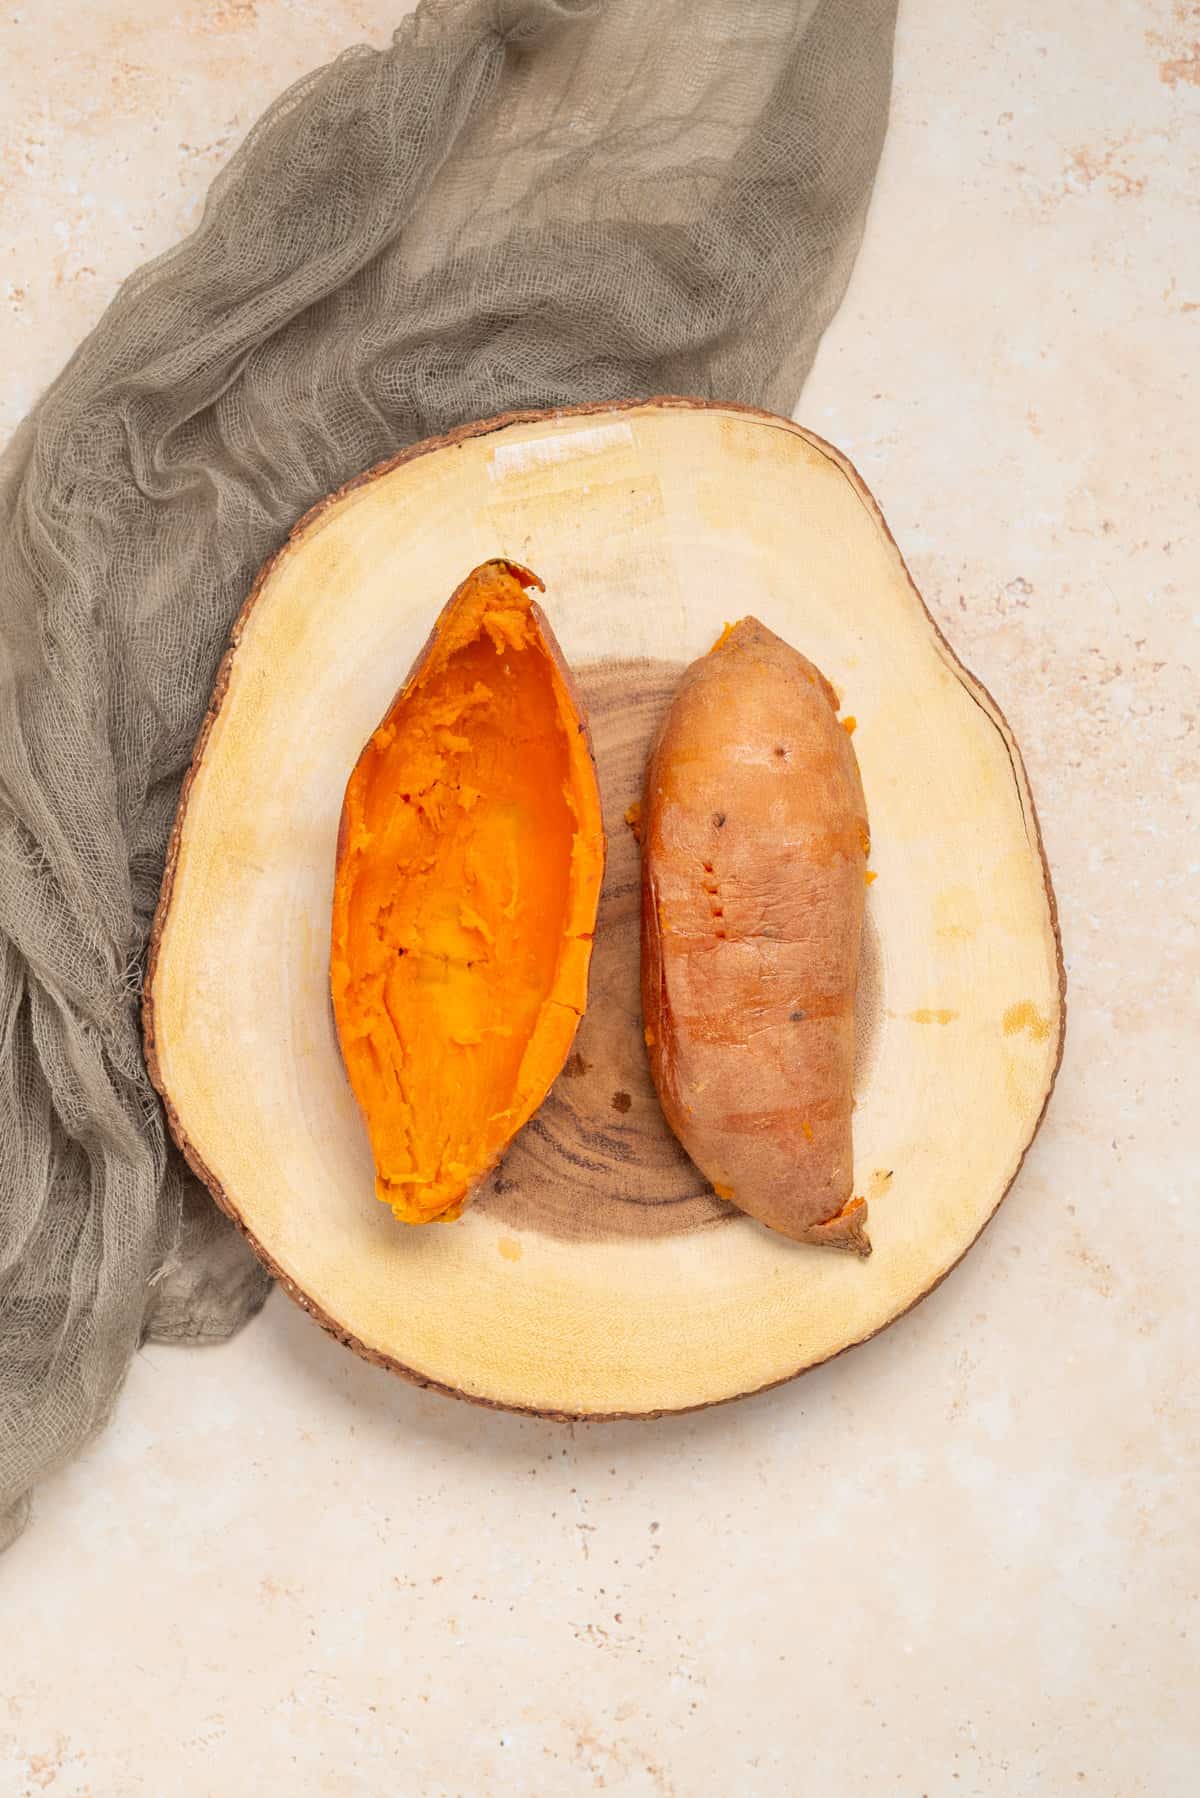 An image of sweet potato, sliced in half lengthwise.